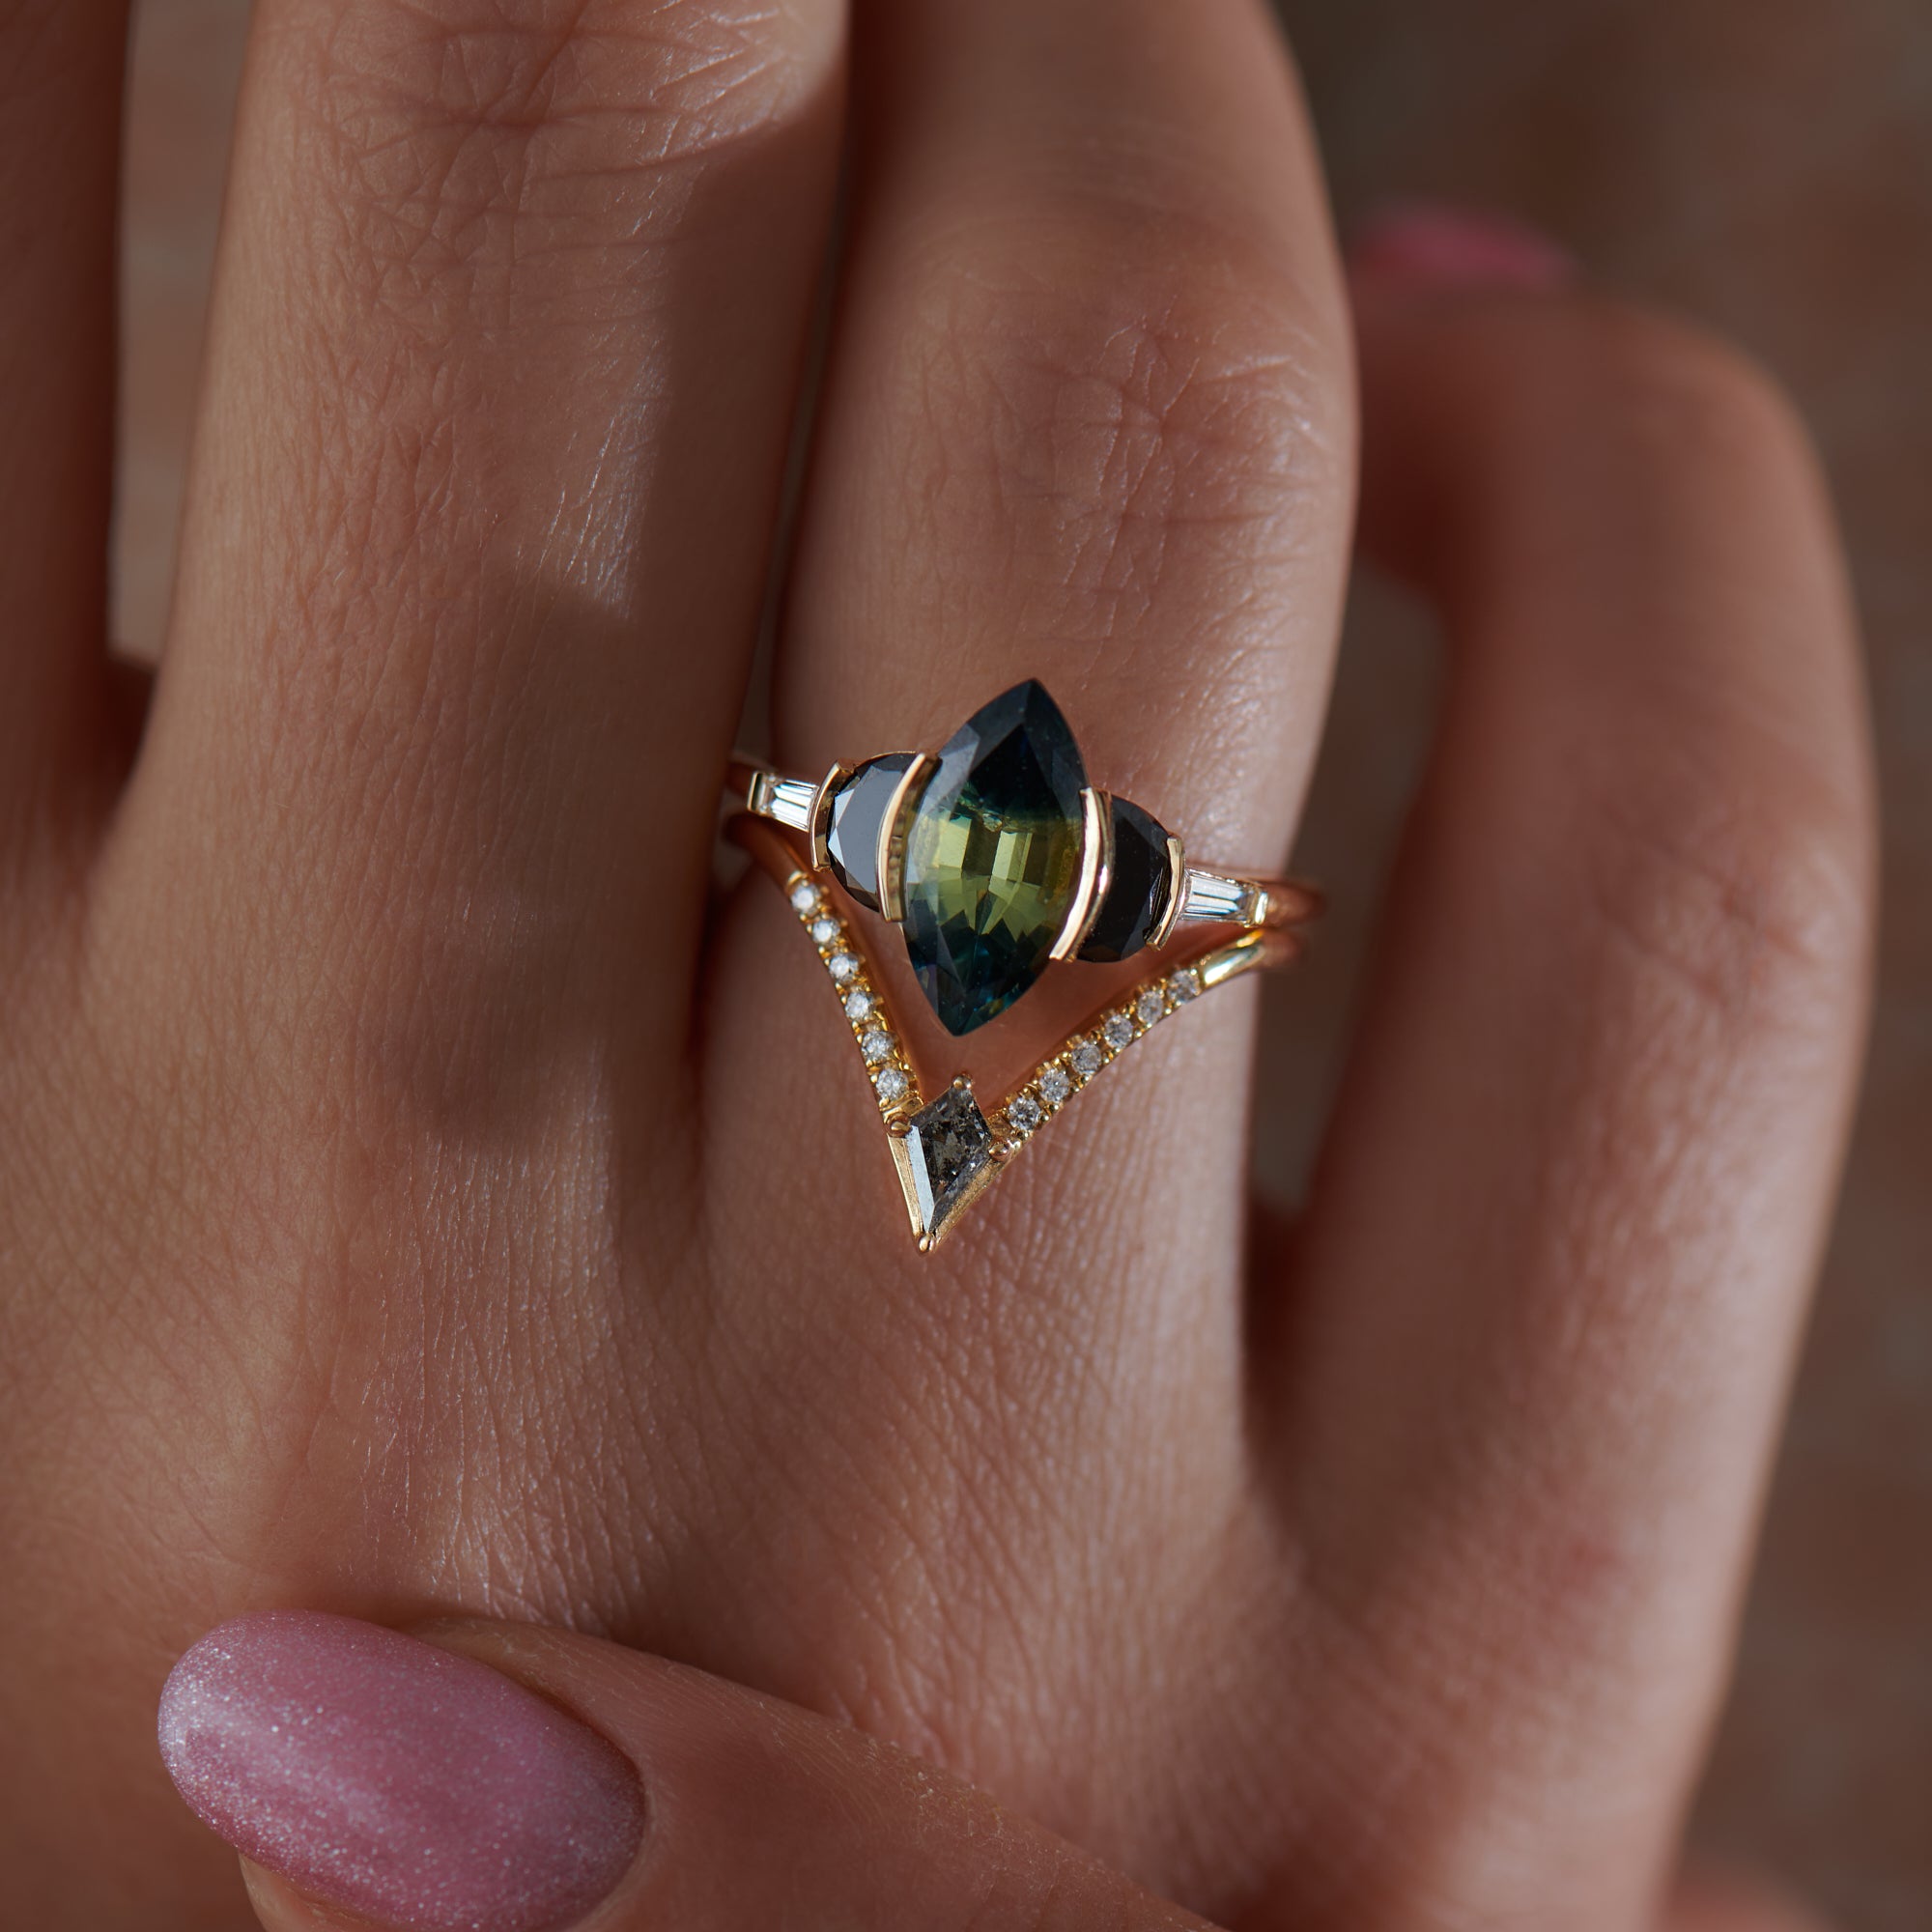 Dragon's Eye Ooak Parti Sapphire & Black Diamond Engagement Ring 2.5 (Pictured in The Listing)